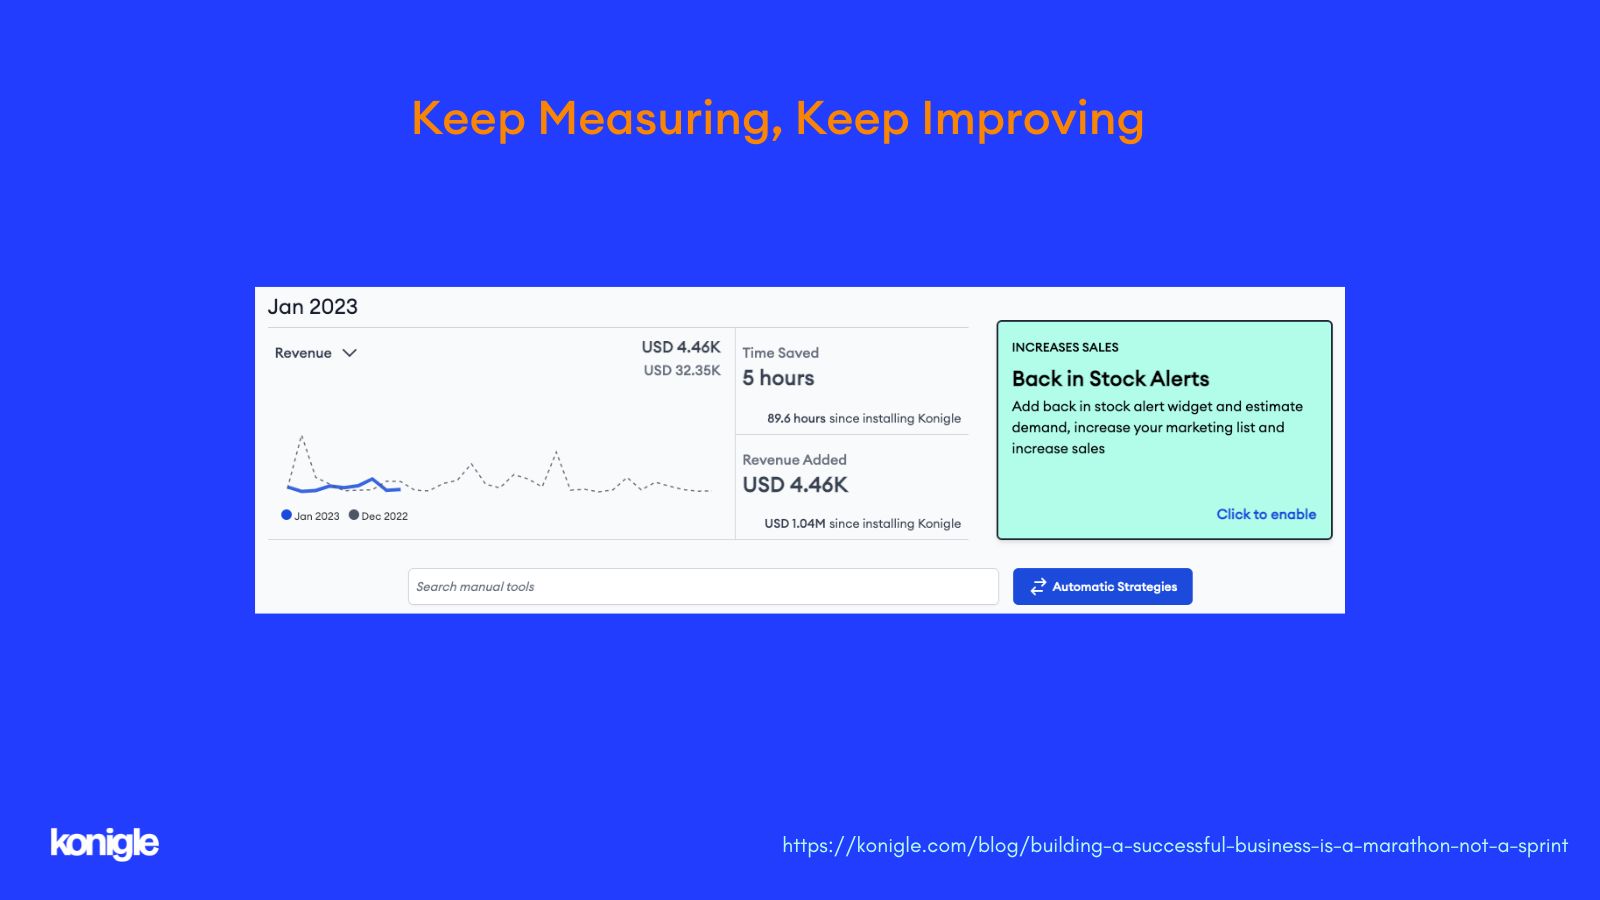 Konigle provides not just tools to automate profitable growth tactics but also provides an easy way to monitor metrics that matter.